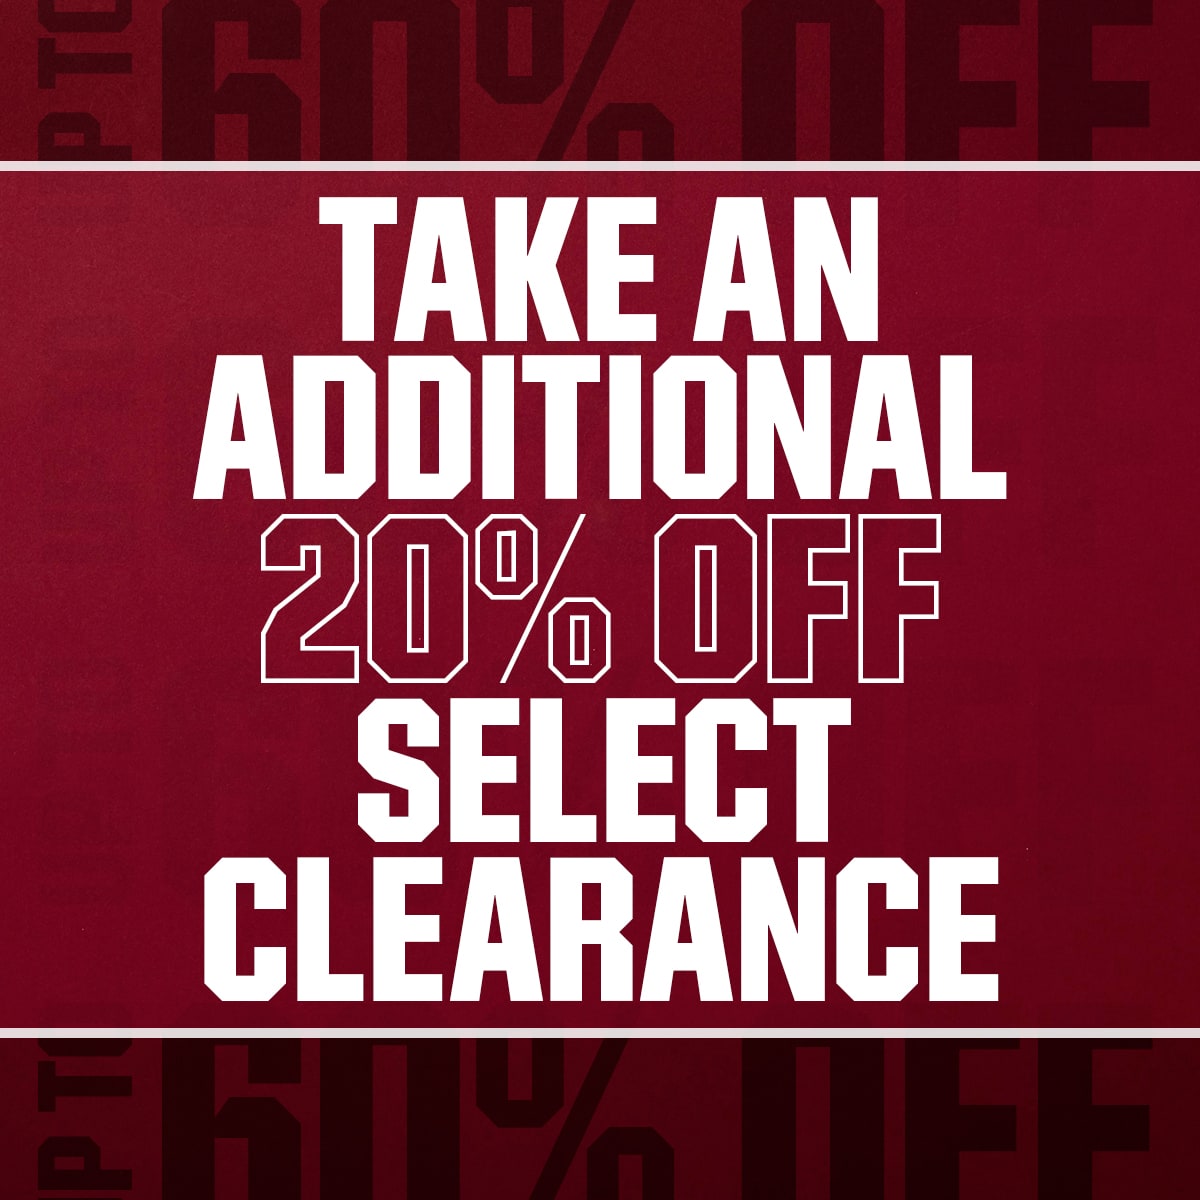 Up to 60% off. Take an additional 20% off select clearance.  1AL LI TR 20510k S1301H CLEARANGE 